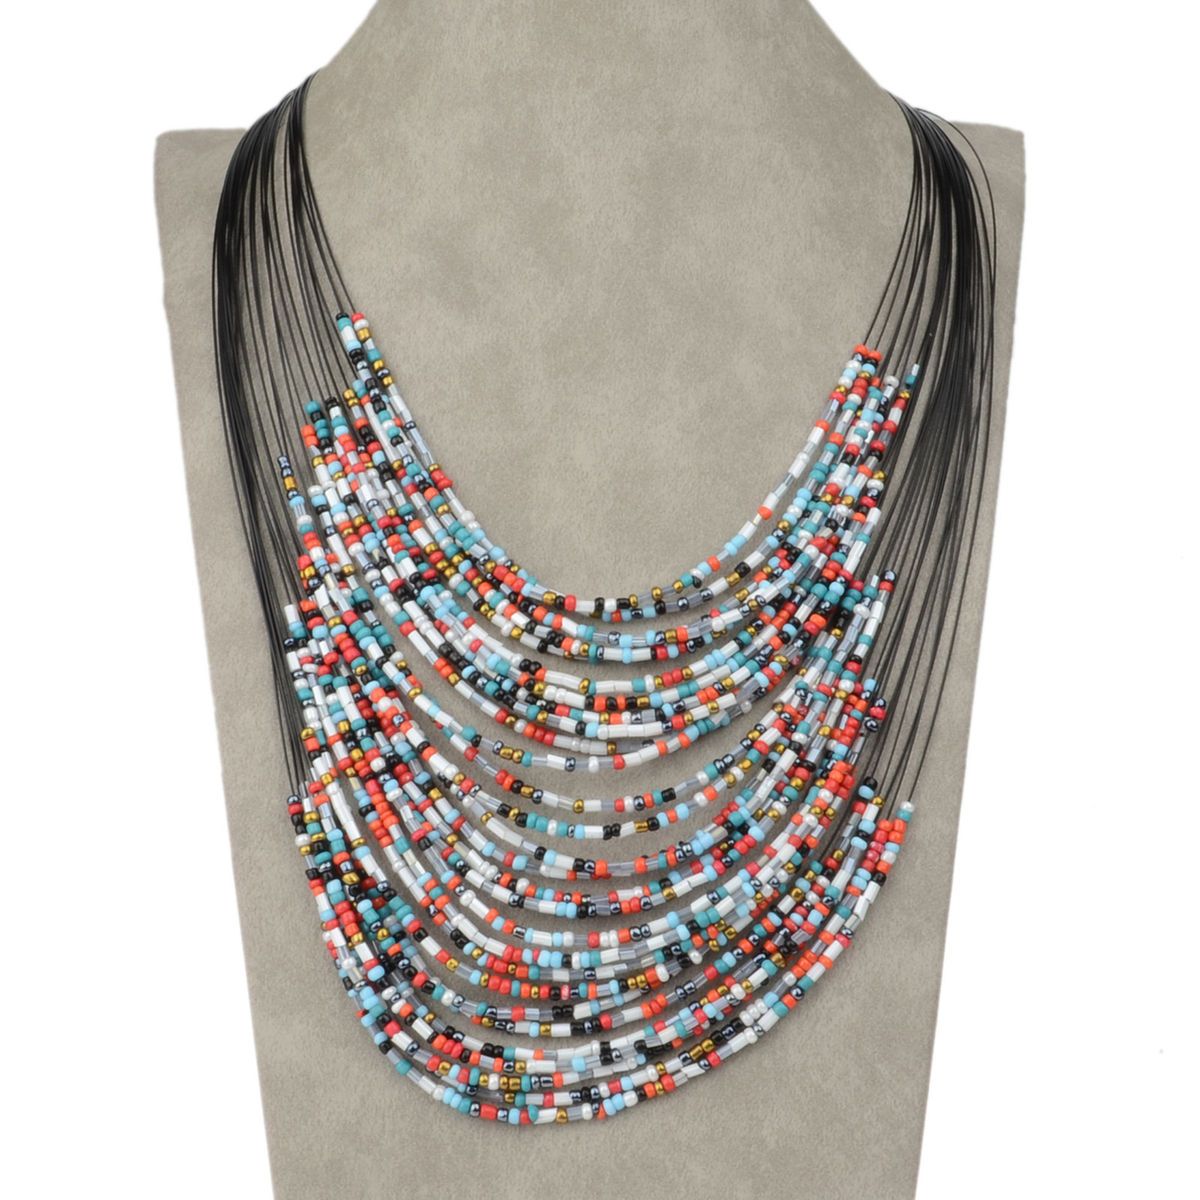 Colorful Multilayer Glass Beads Jewelry Pendant Necklace Earrings Set